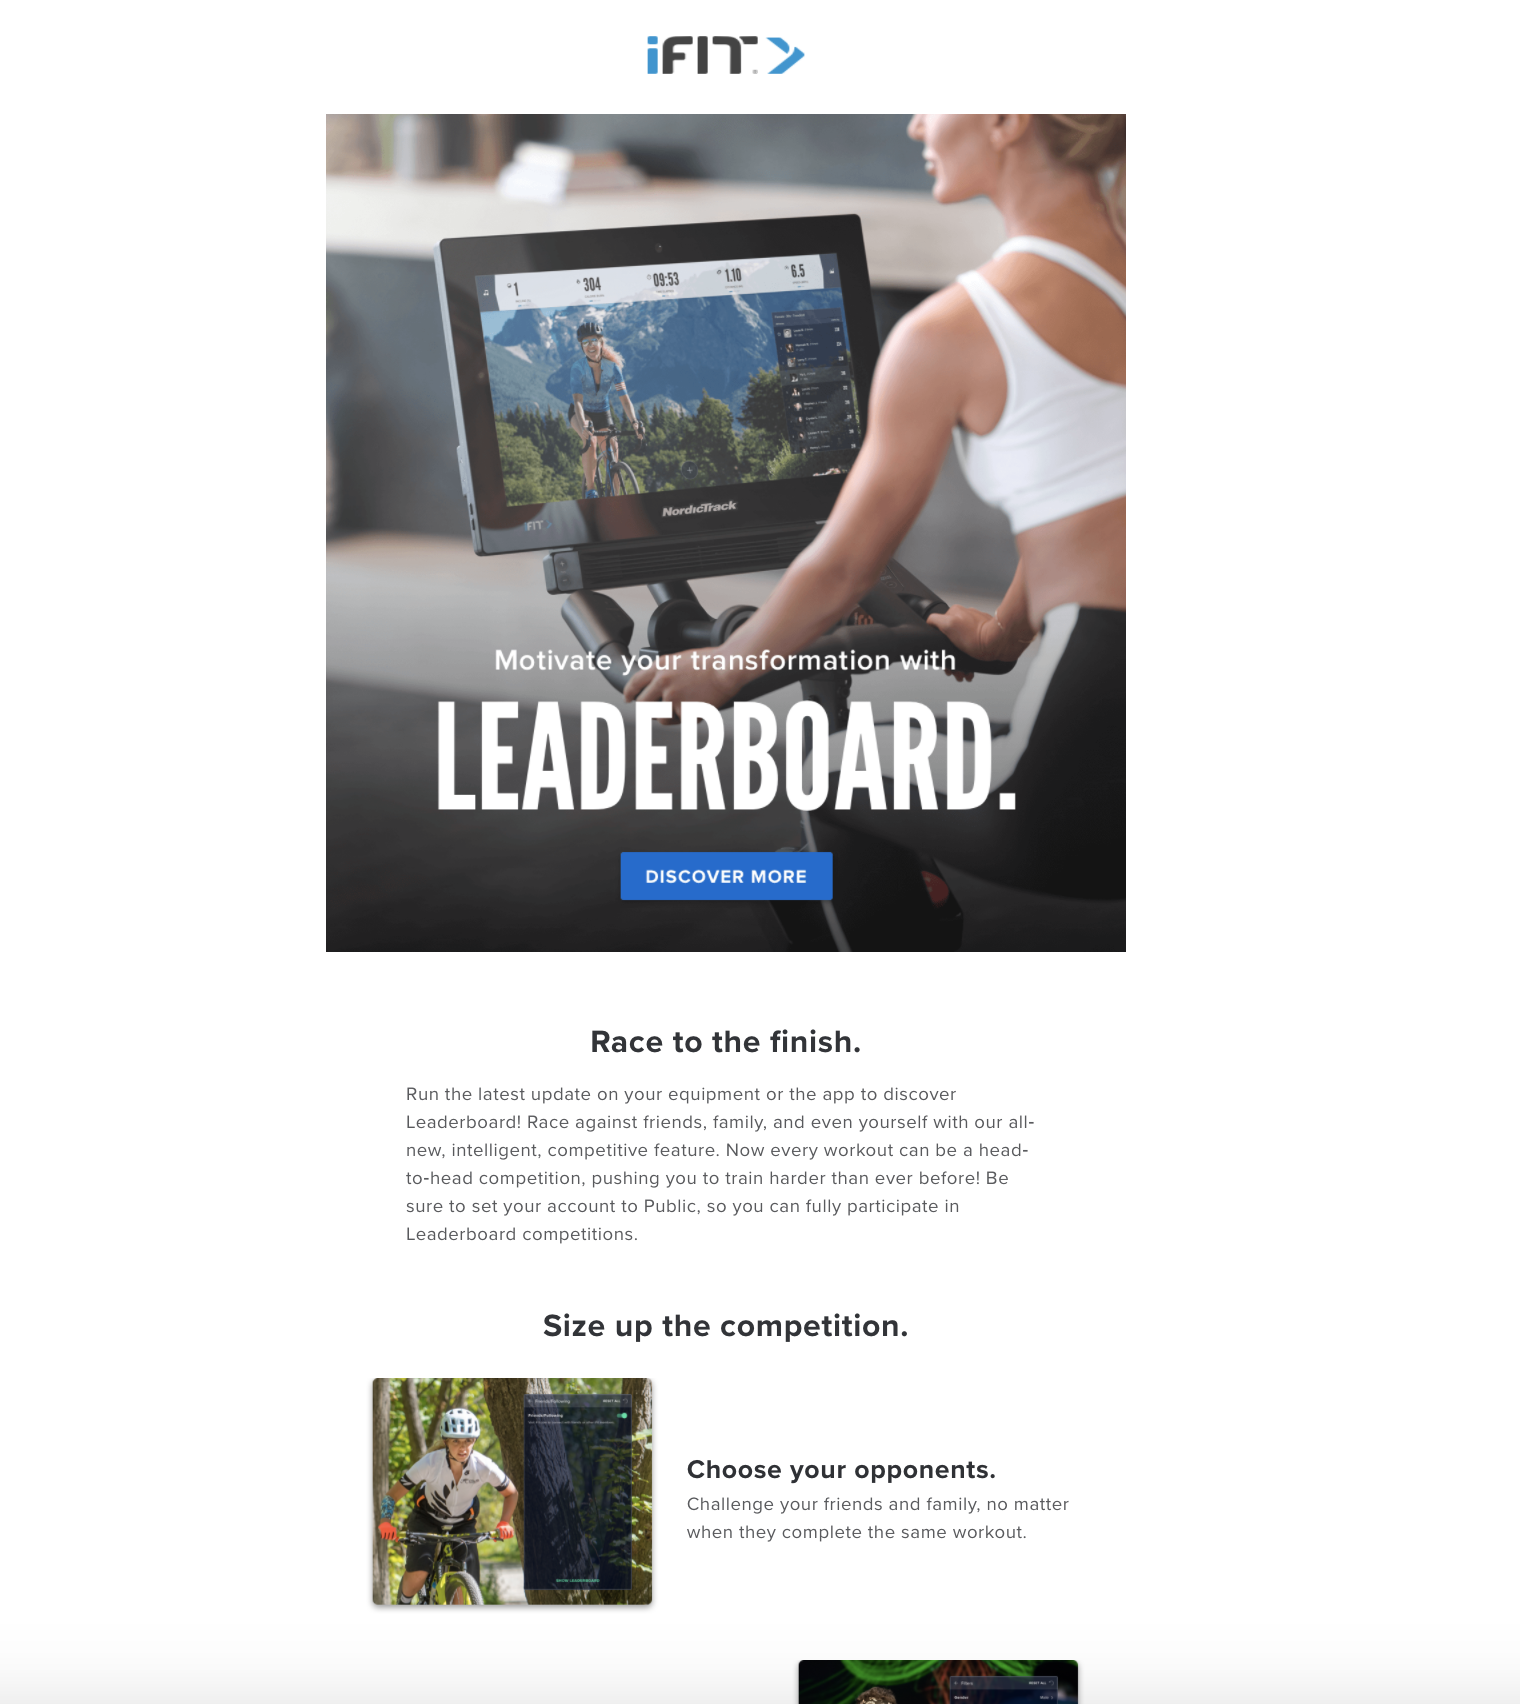 Leaderboard Feature Launch Email